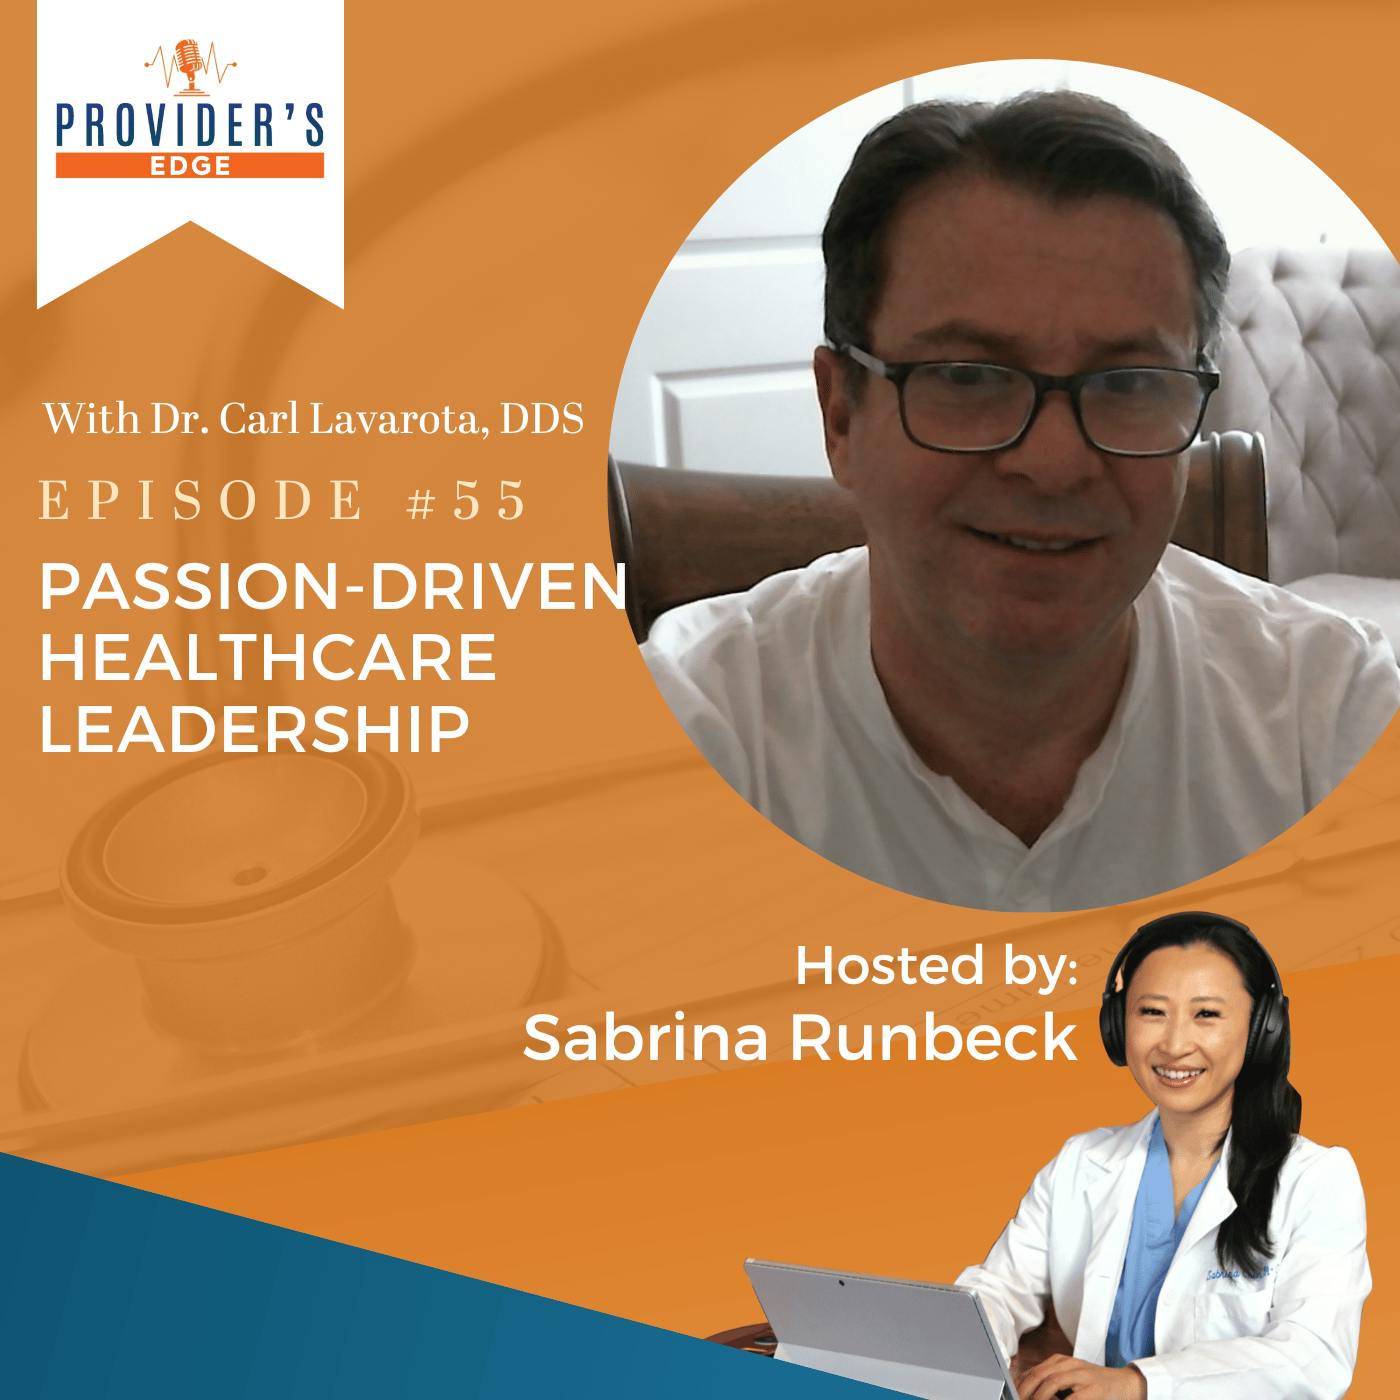 Providers Edge: Passion-Driven Healthcare Leadership – Inspiring a Culture of Service with Dr. Carl Lavorata